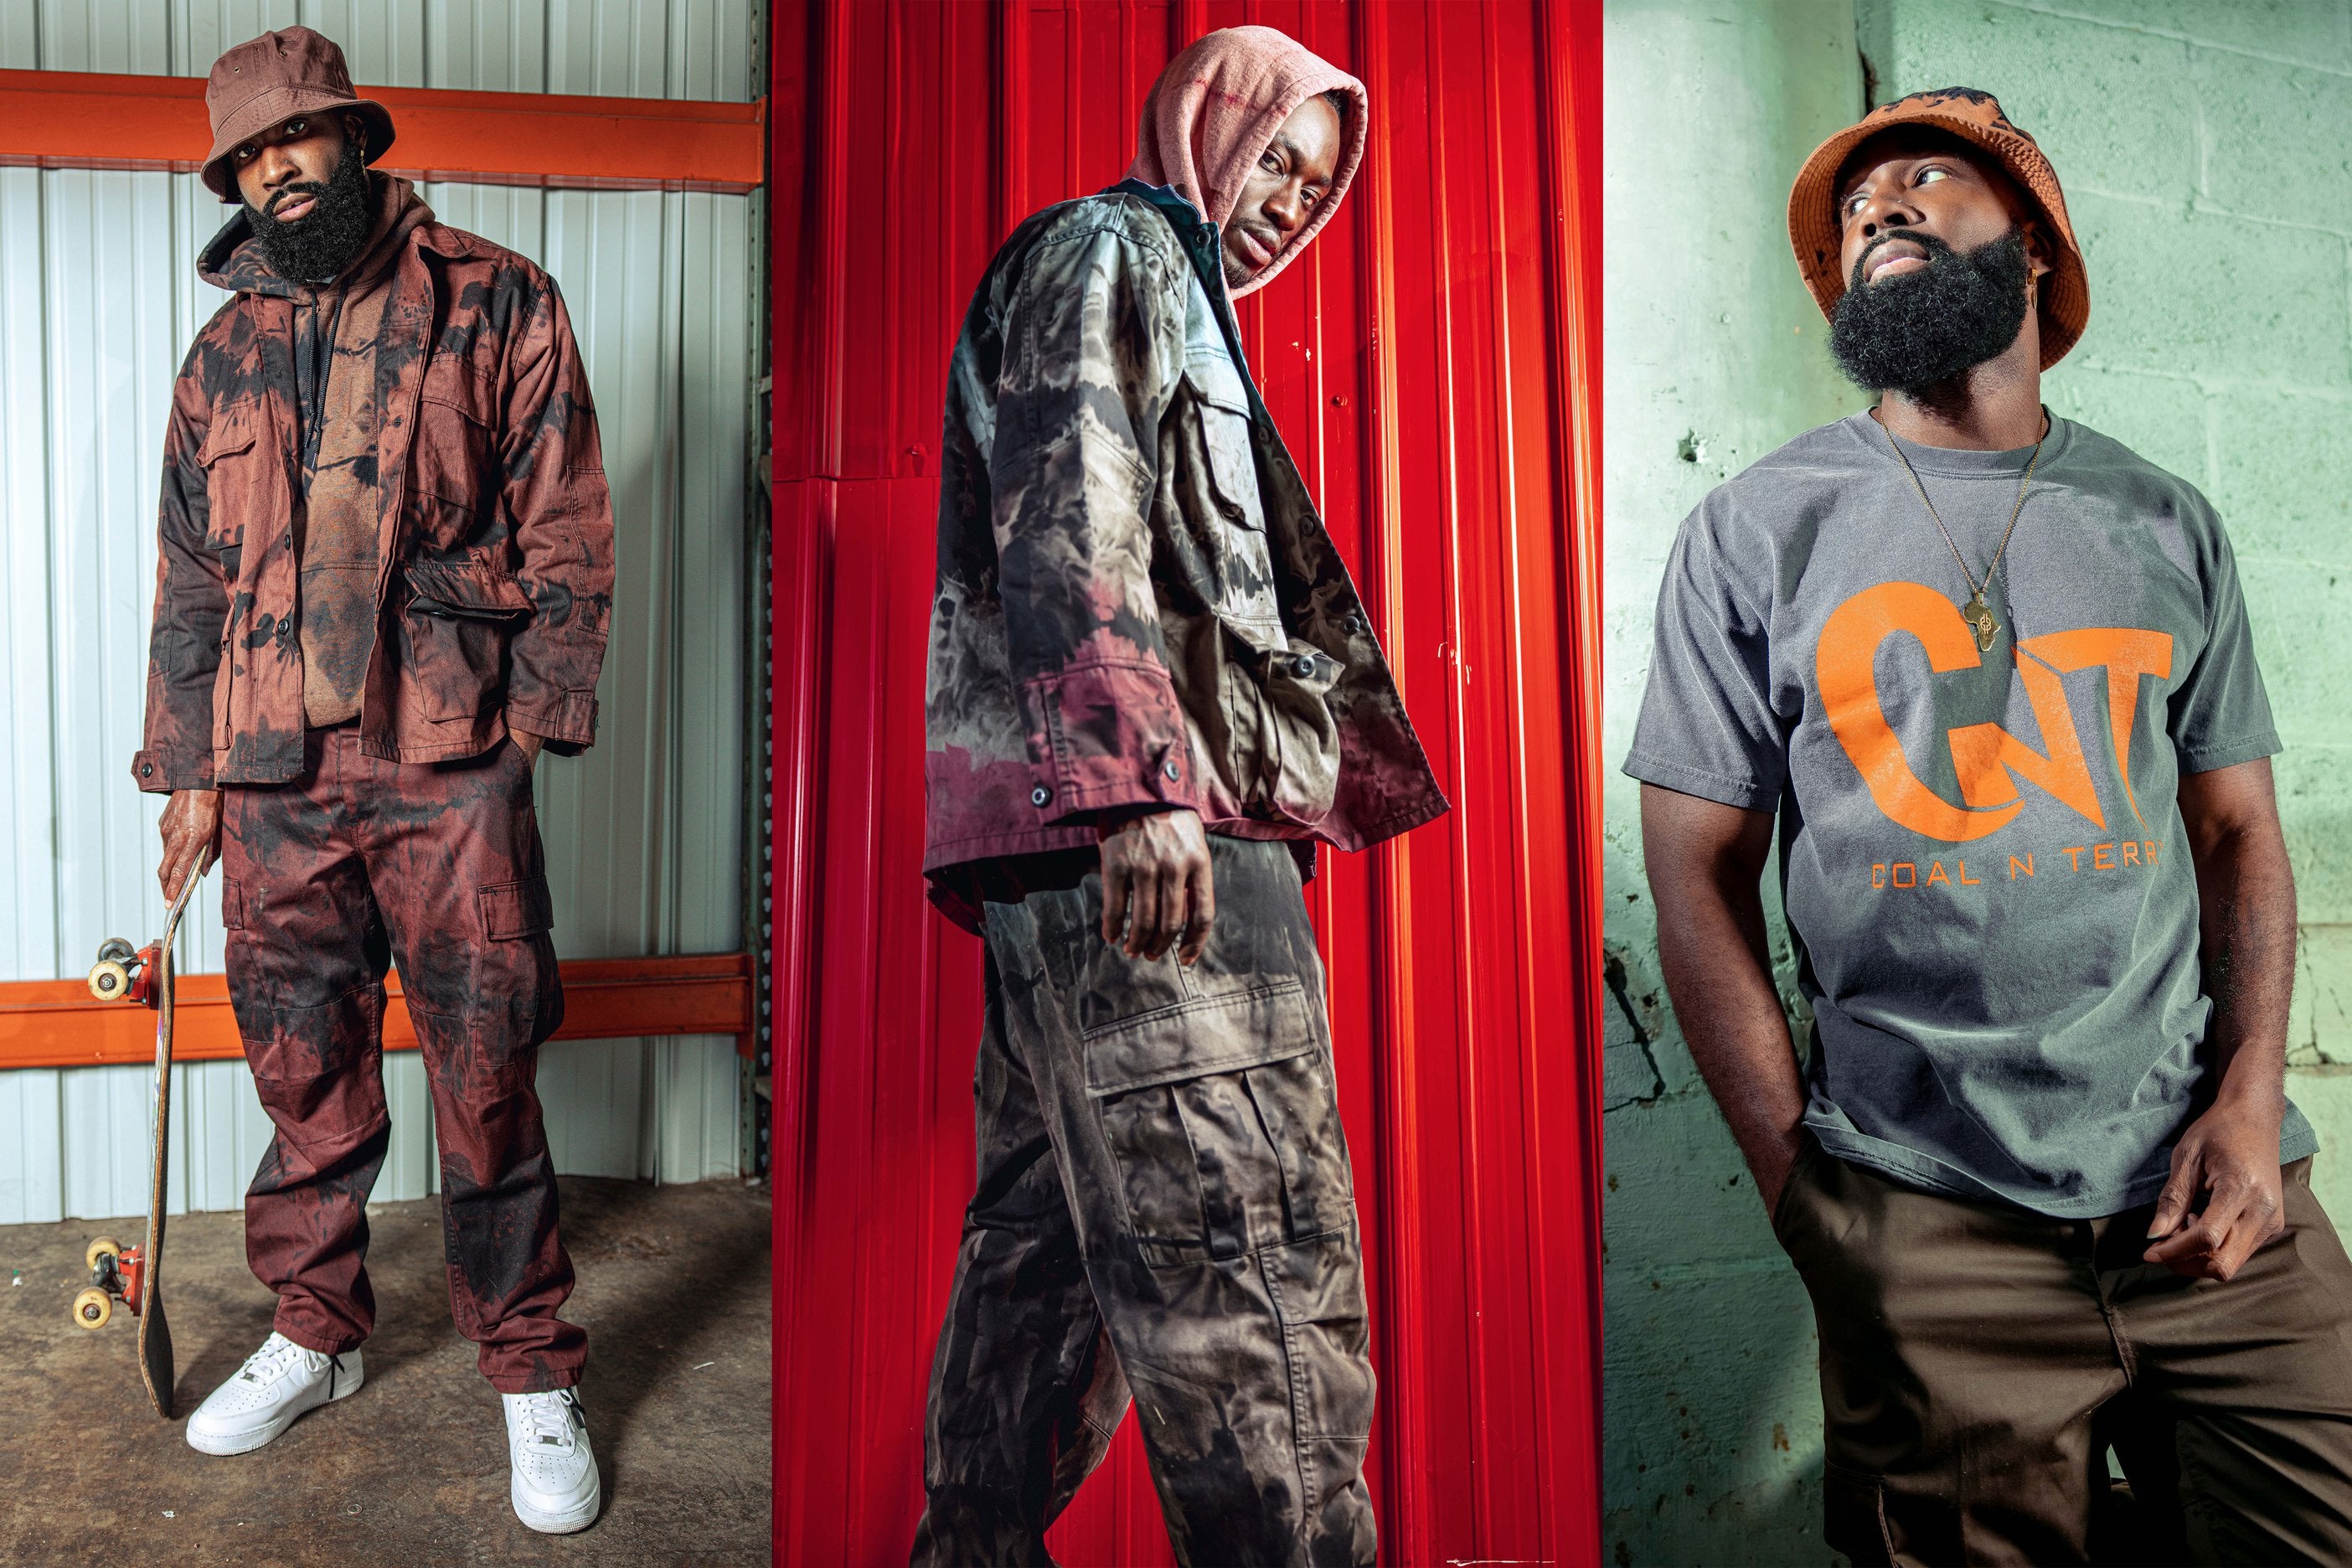 3-panel photo with models wearing tie-dyed hoodies and cargo pants